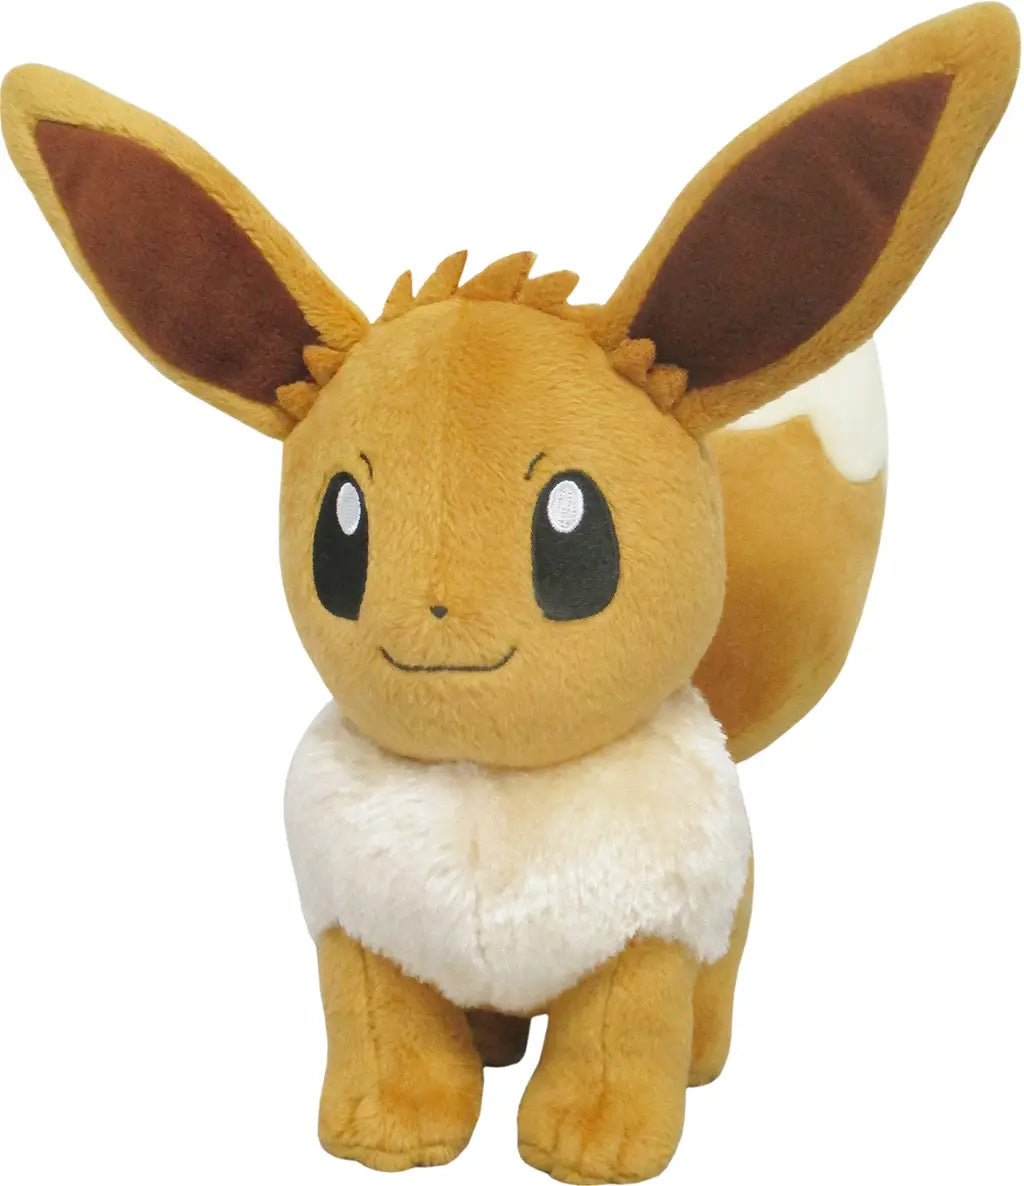 Eevee (S) - Pokemon All Star Collection Plush Toy